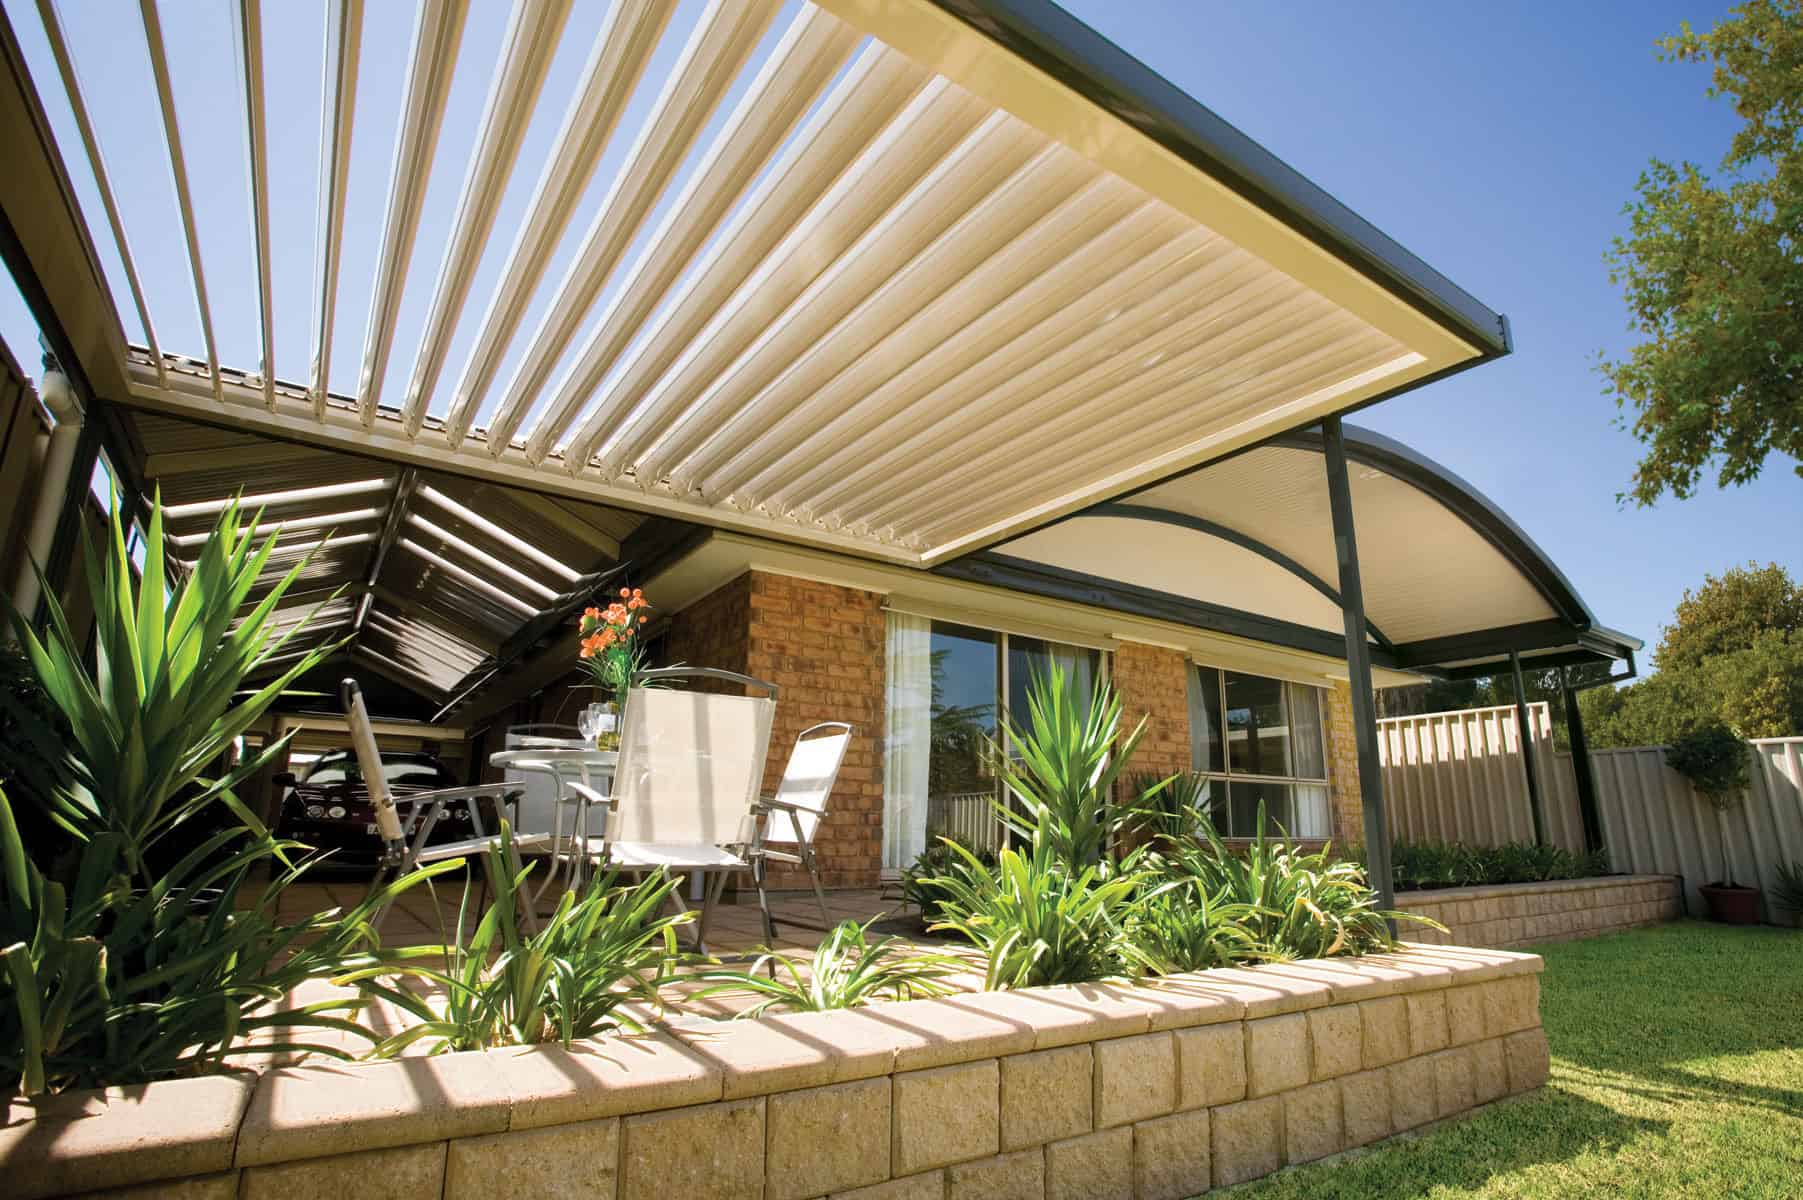 Carports And Awnings Installer Cape Town Get Your Carport Price My Carports